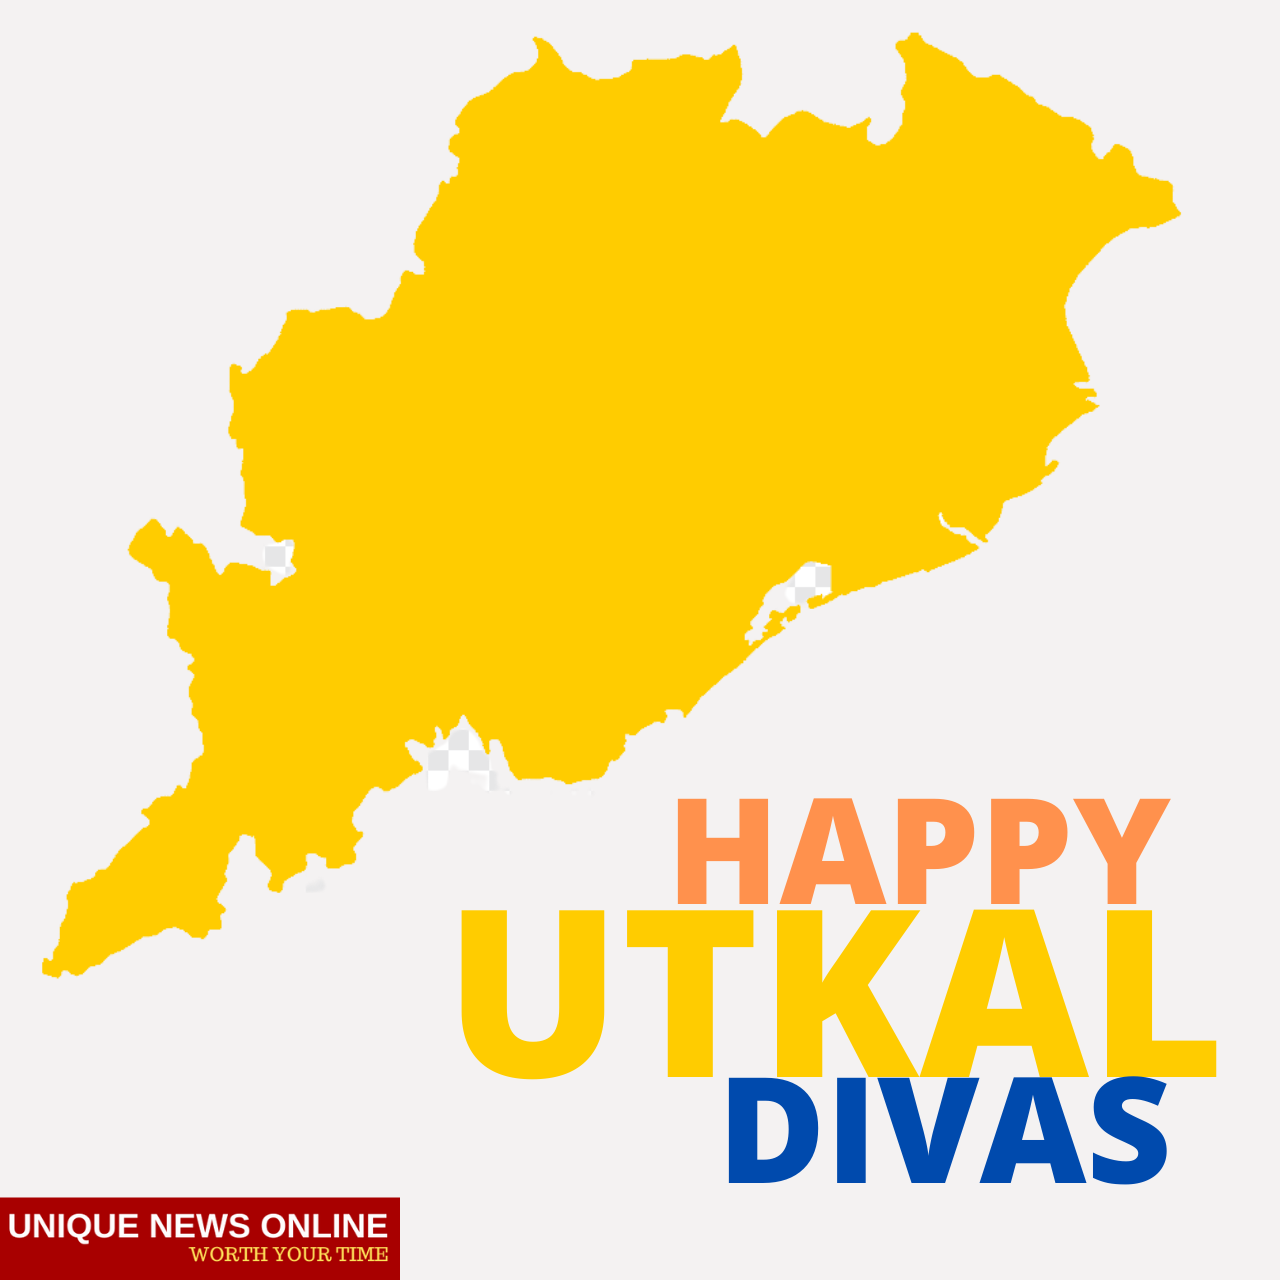 Utkal Divas (Odisha Divas) 2021 Wishes, Greetings, Messages, Quotes and Images